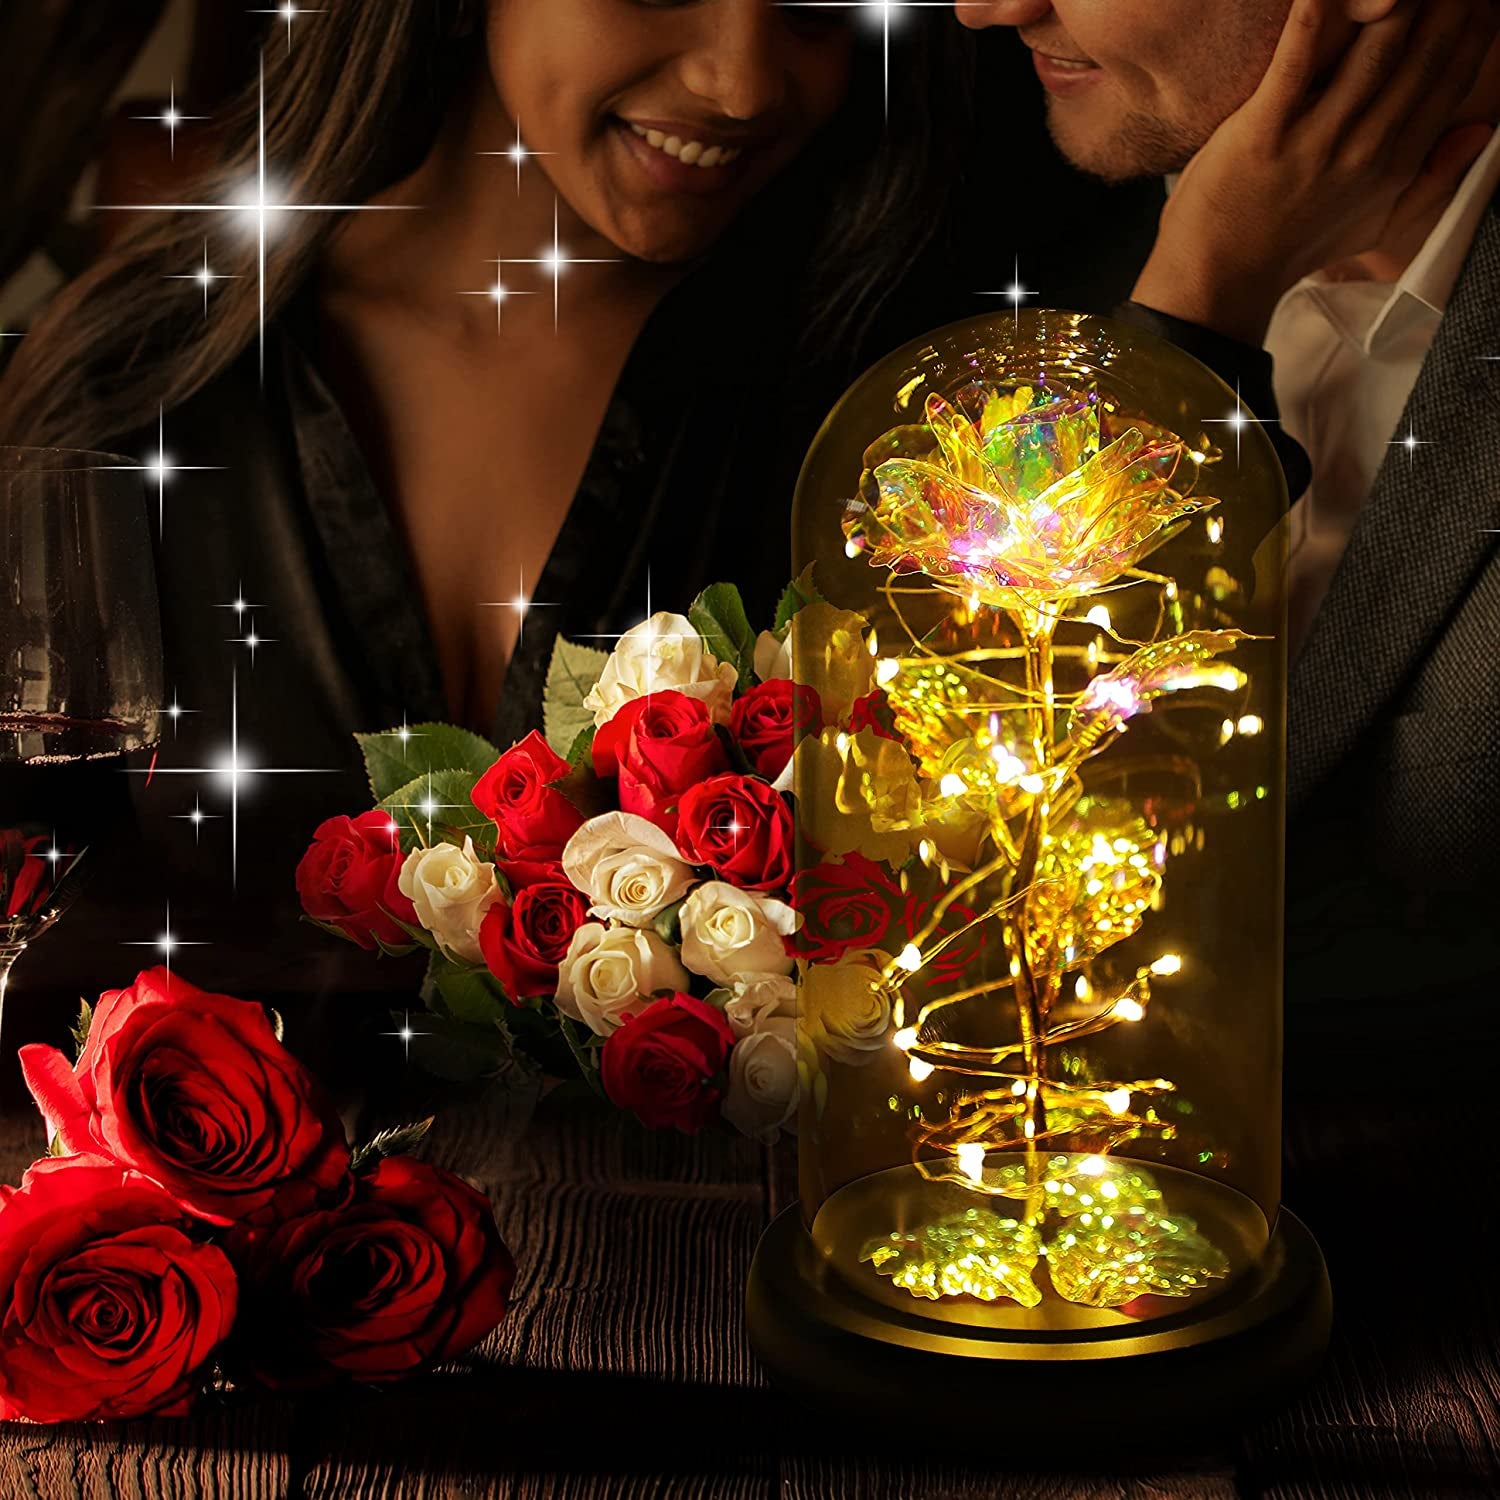 Rose Flower Gifts for Women,Birthday Gifts for Women,Womens Gifts for Christmas,Mom Gift for Xmas,Colorful Rainbow Artificial Flower Rose Light up Rose in a Glass Dome,Flower Gifts for Her,Anniversary